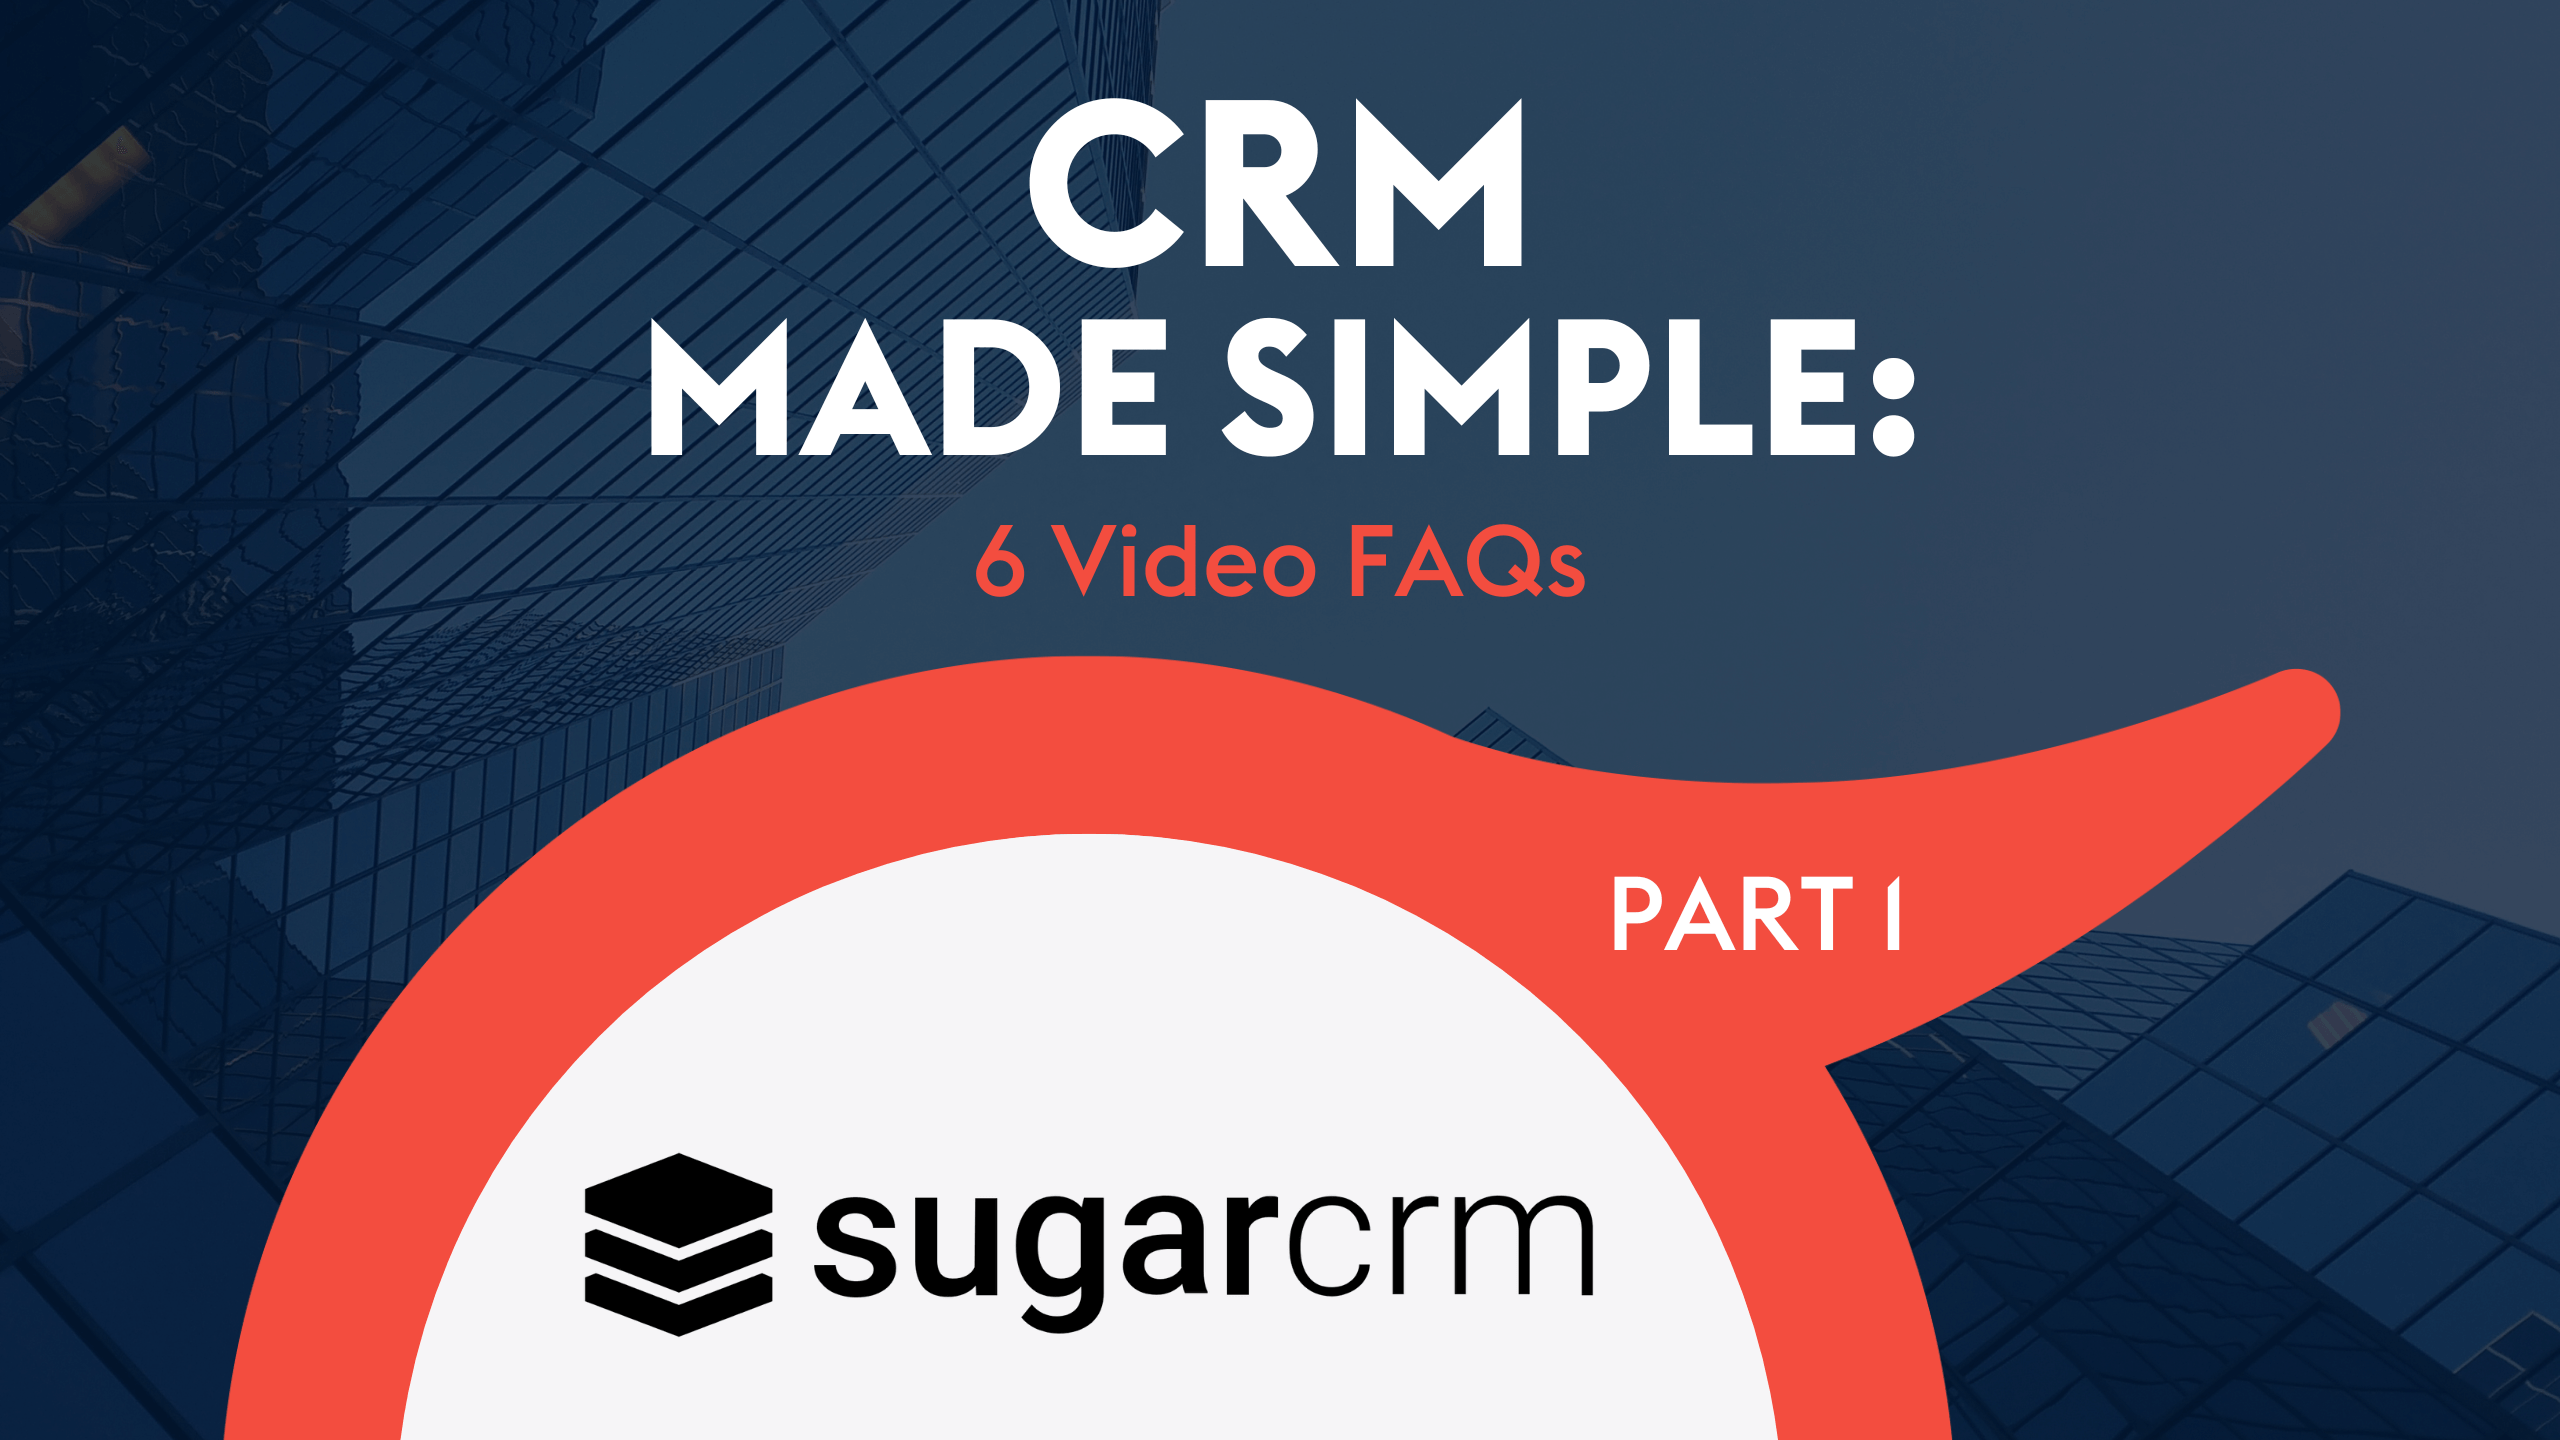 ProvidentCRM-CRM-Made-Simple-6-Video-FAQs-Part-1